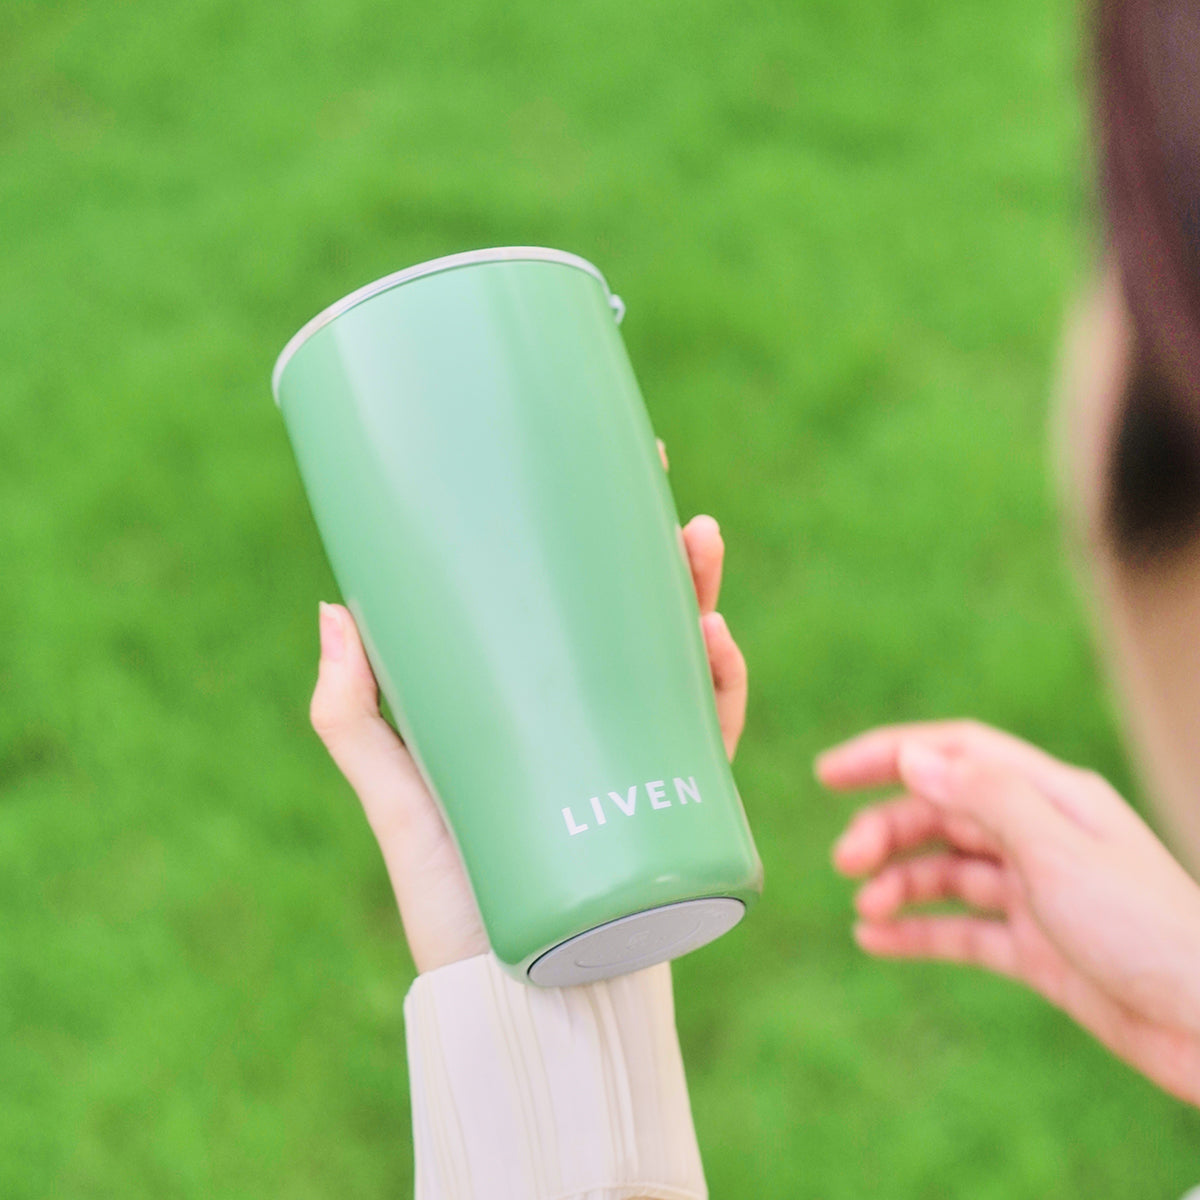 Liven Glow™ Ceramic-Coated Stainless Steel Tumbler 19 oz